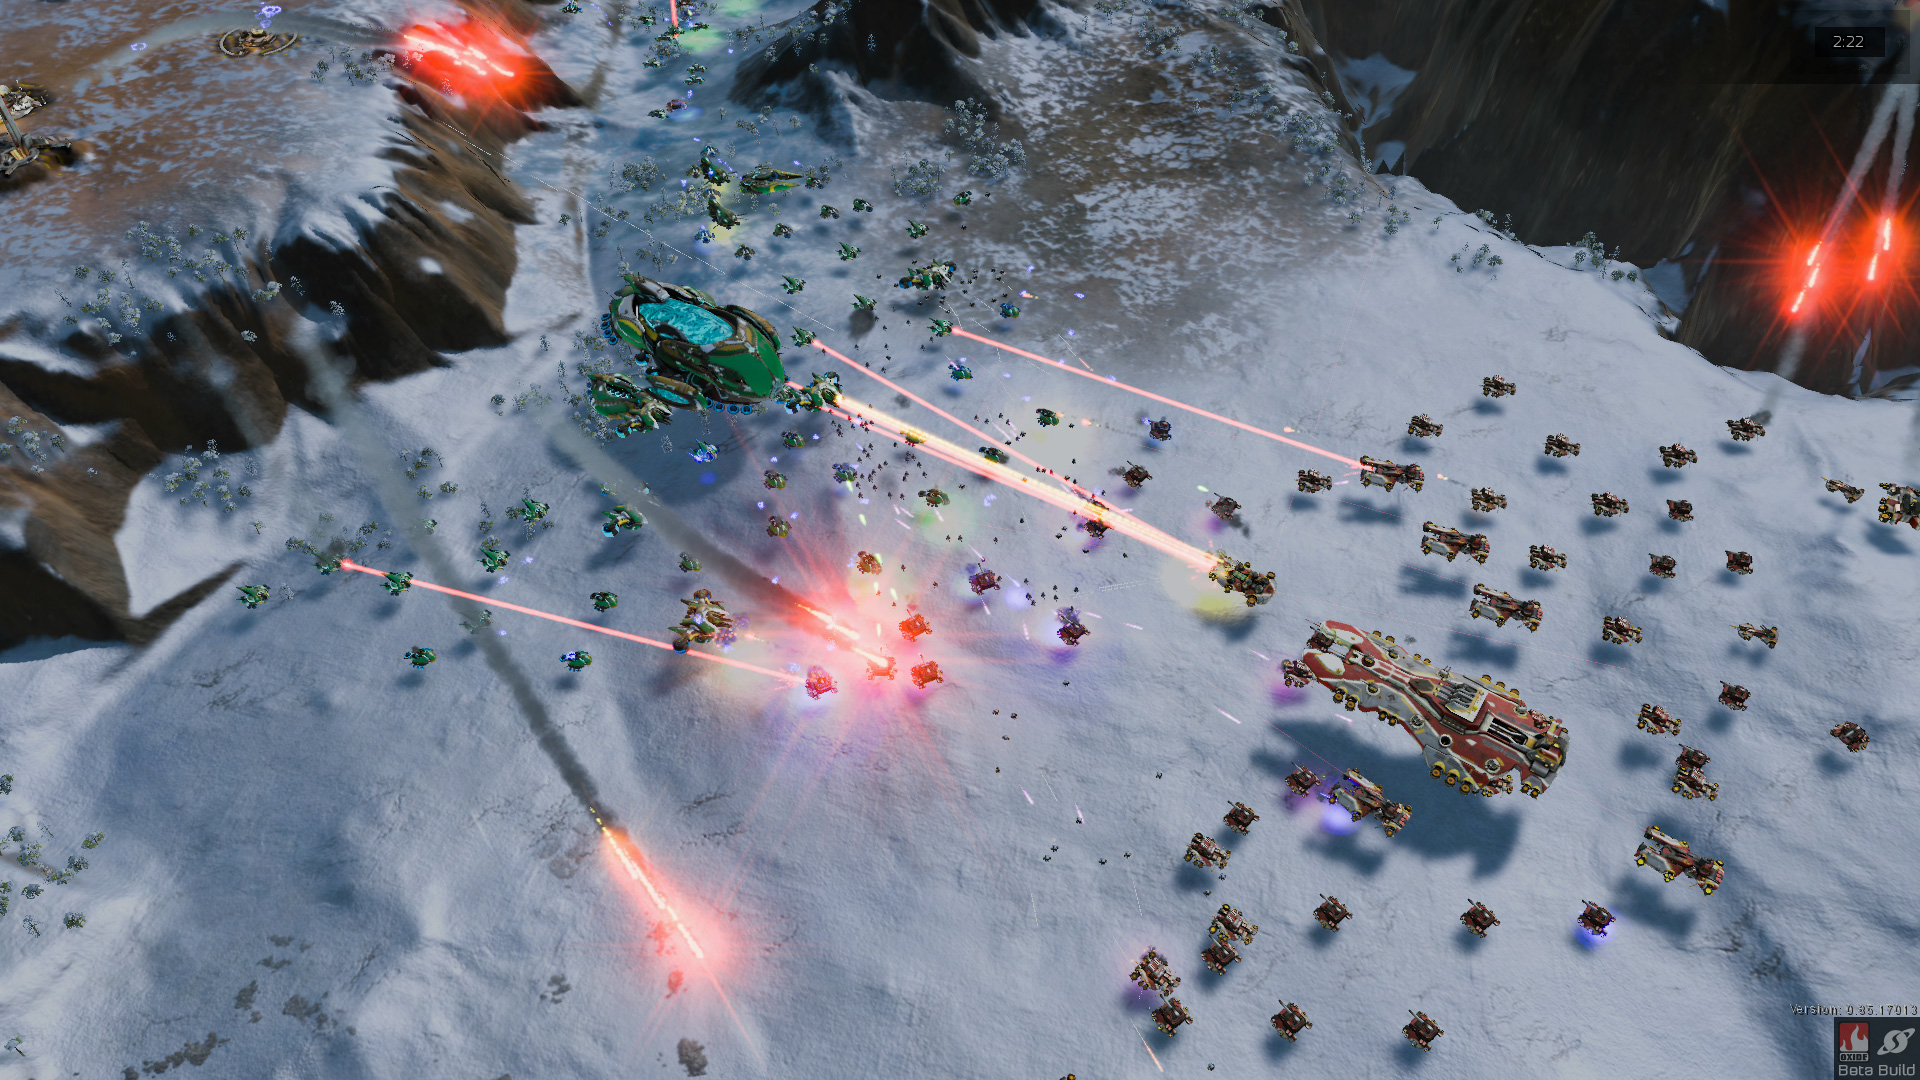 DirectX 12 vs. DirectX 11 - Ashes of the Singularity Revisited: A